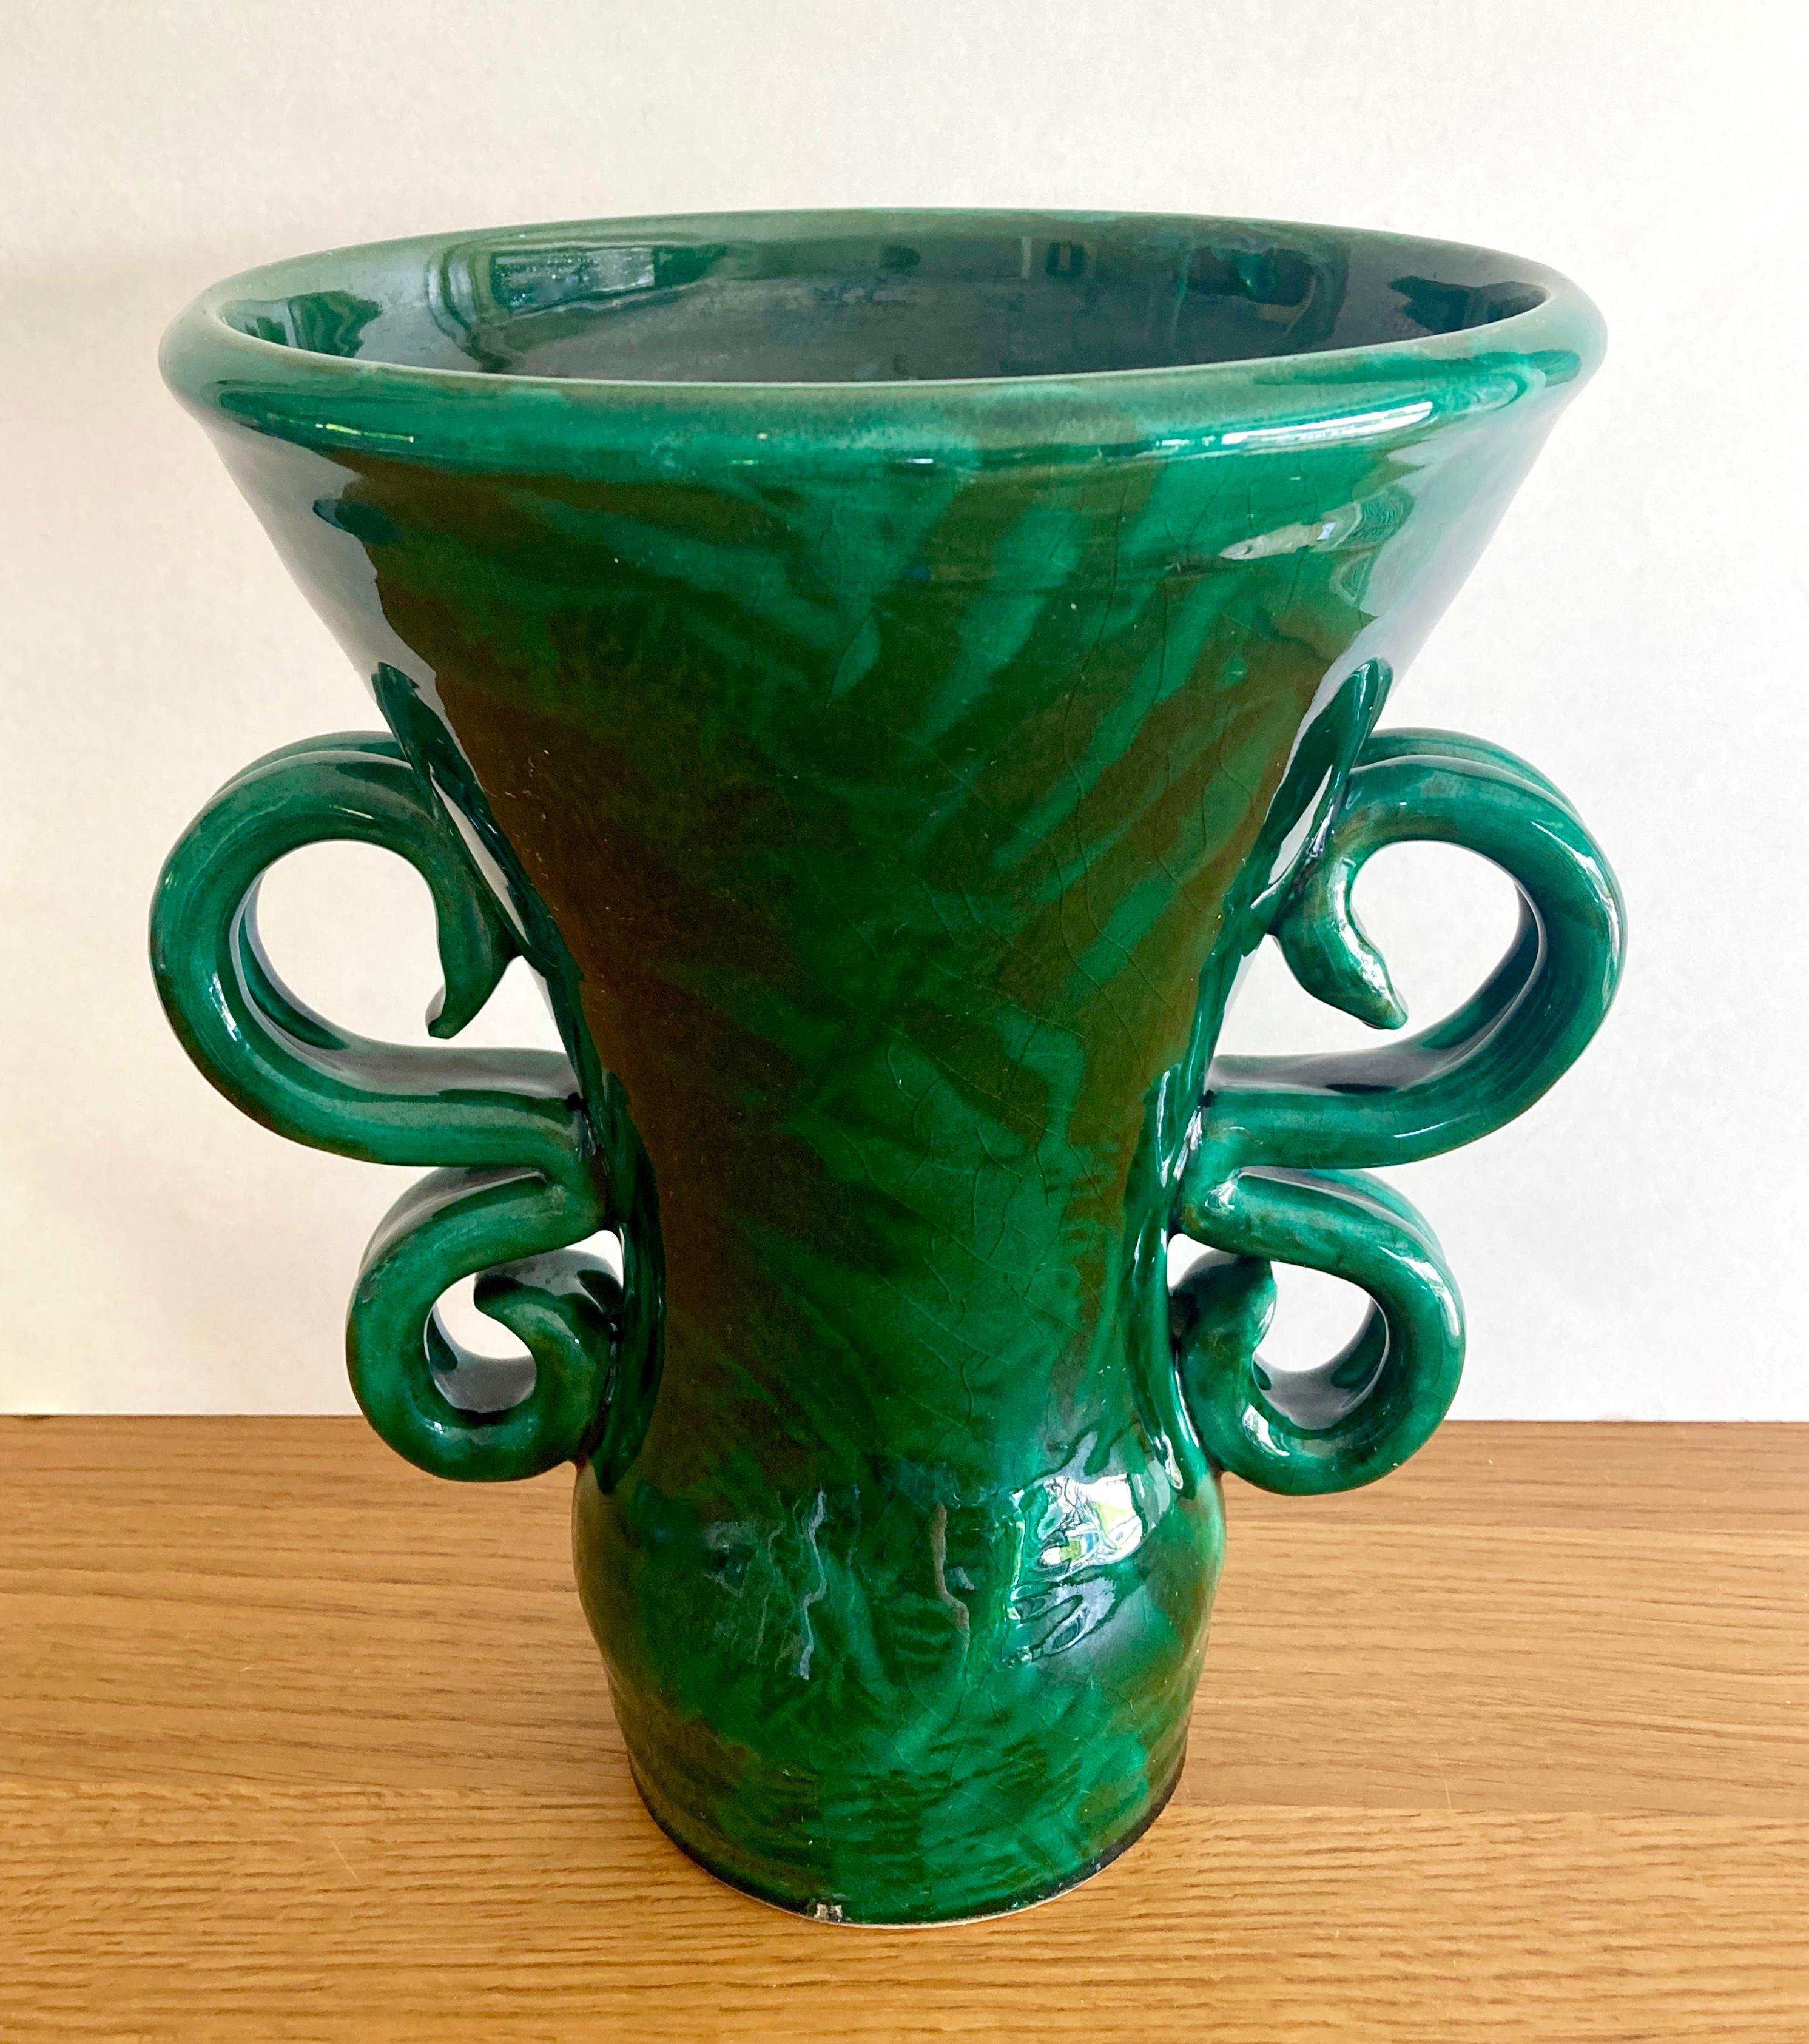 20th Century Large Mid-Century French Stoneware Vase Signed by Jean Austruy (1910-2012) For Sale